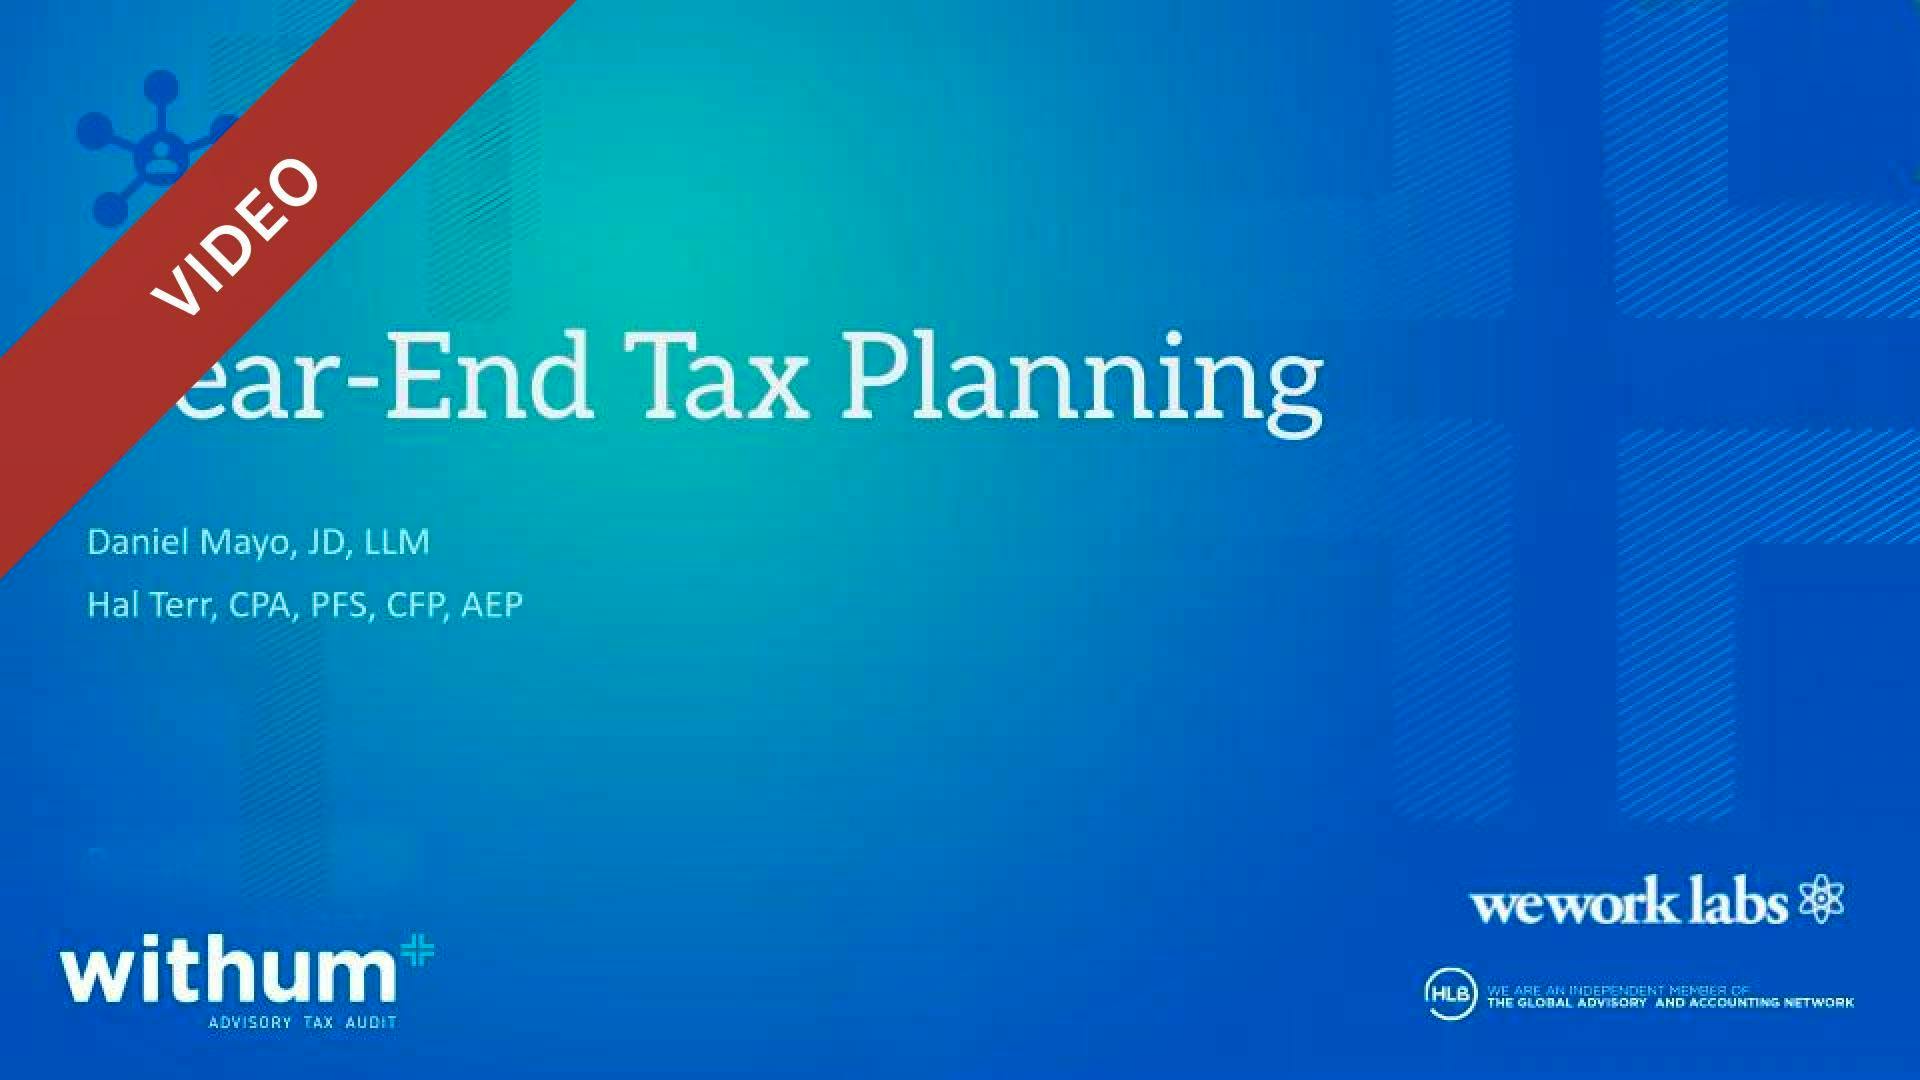 Post-Election Tax Planning